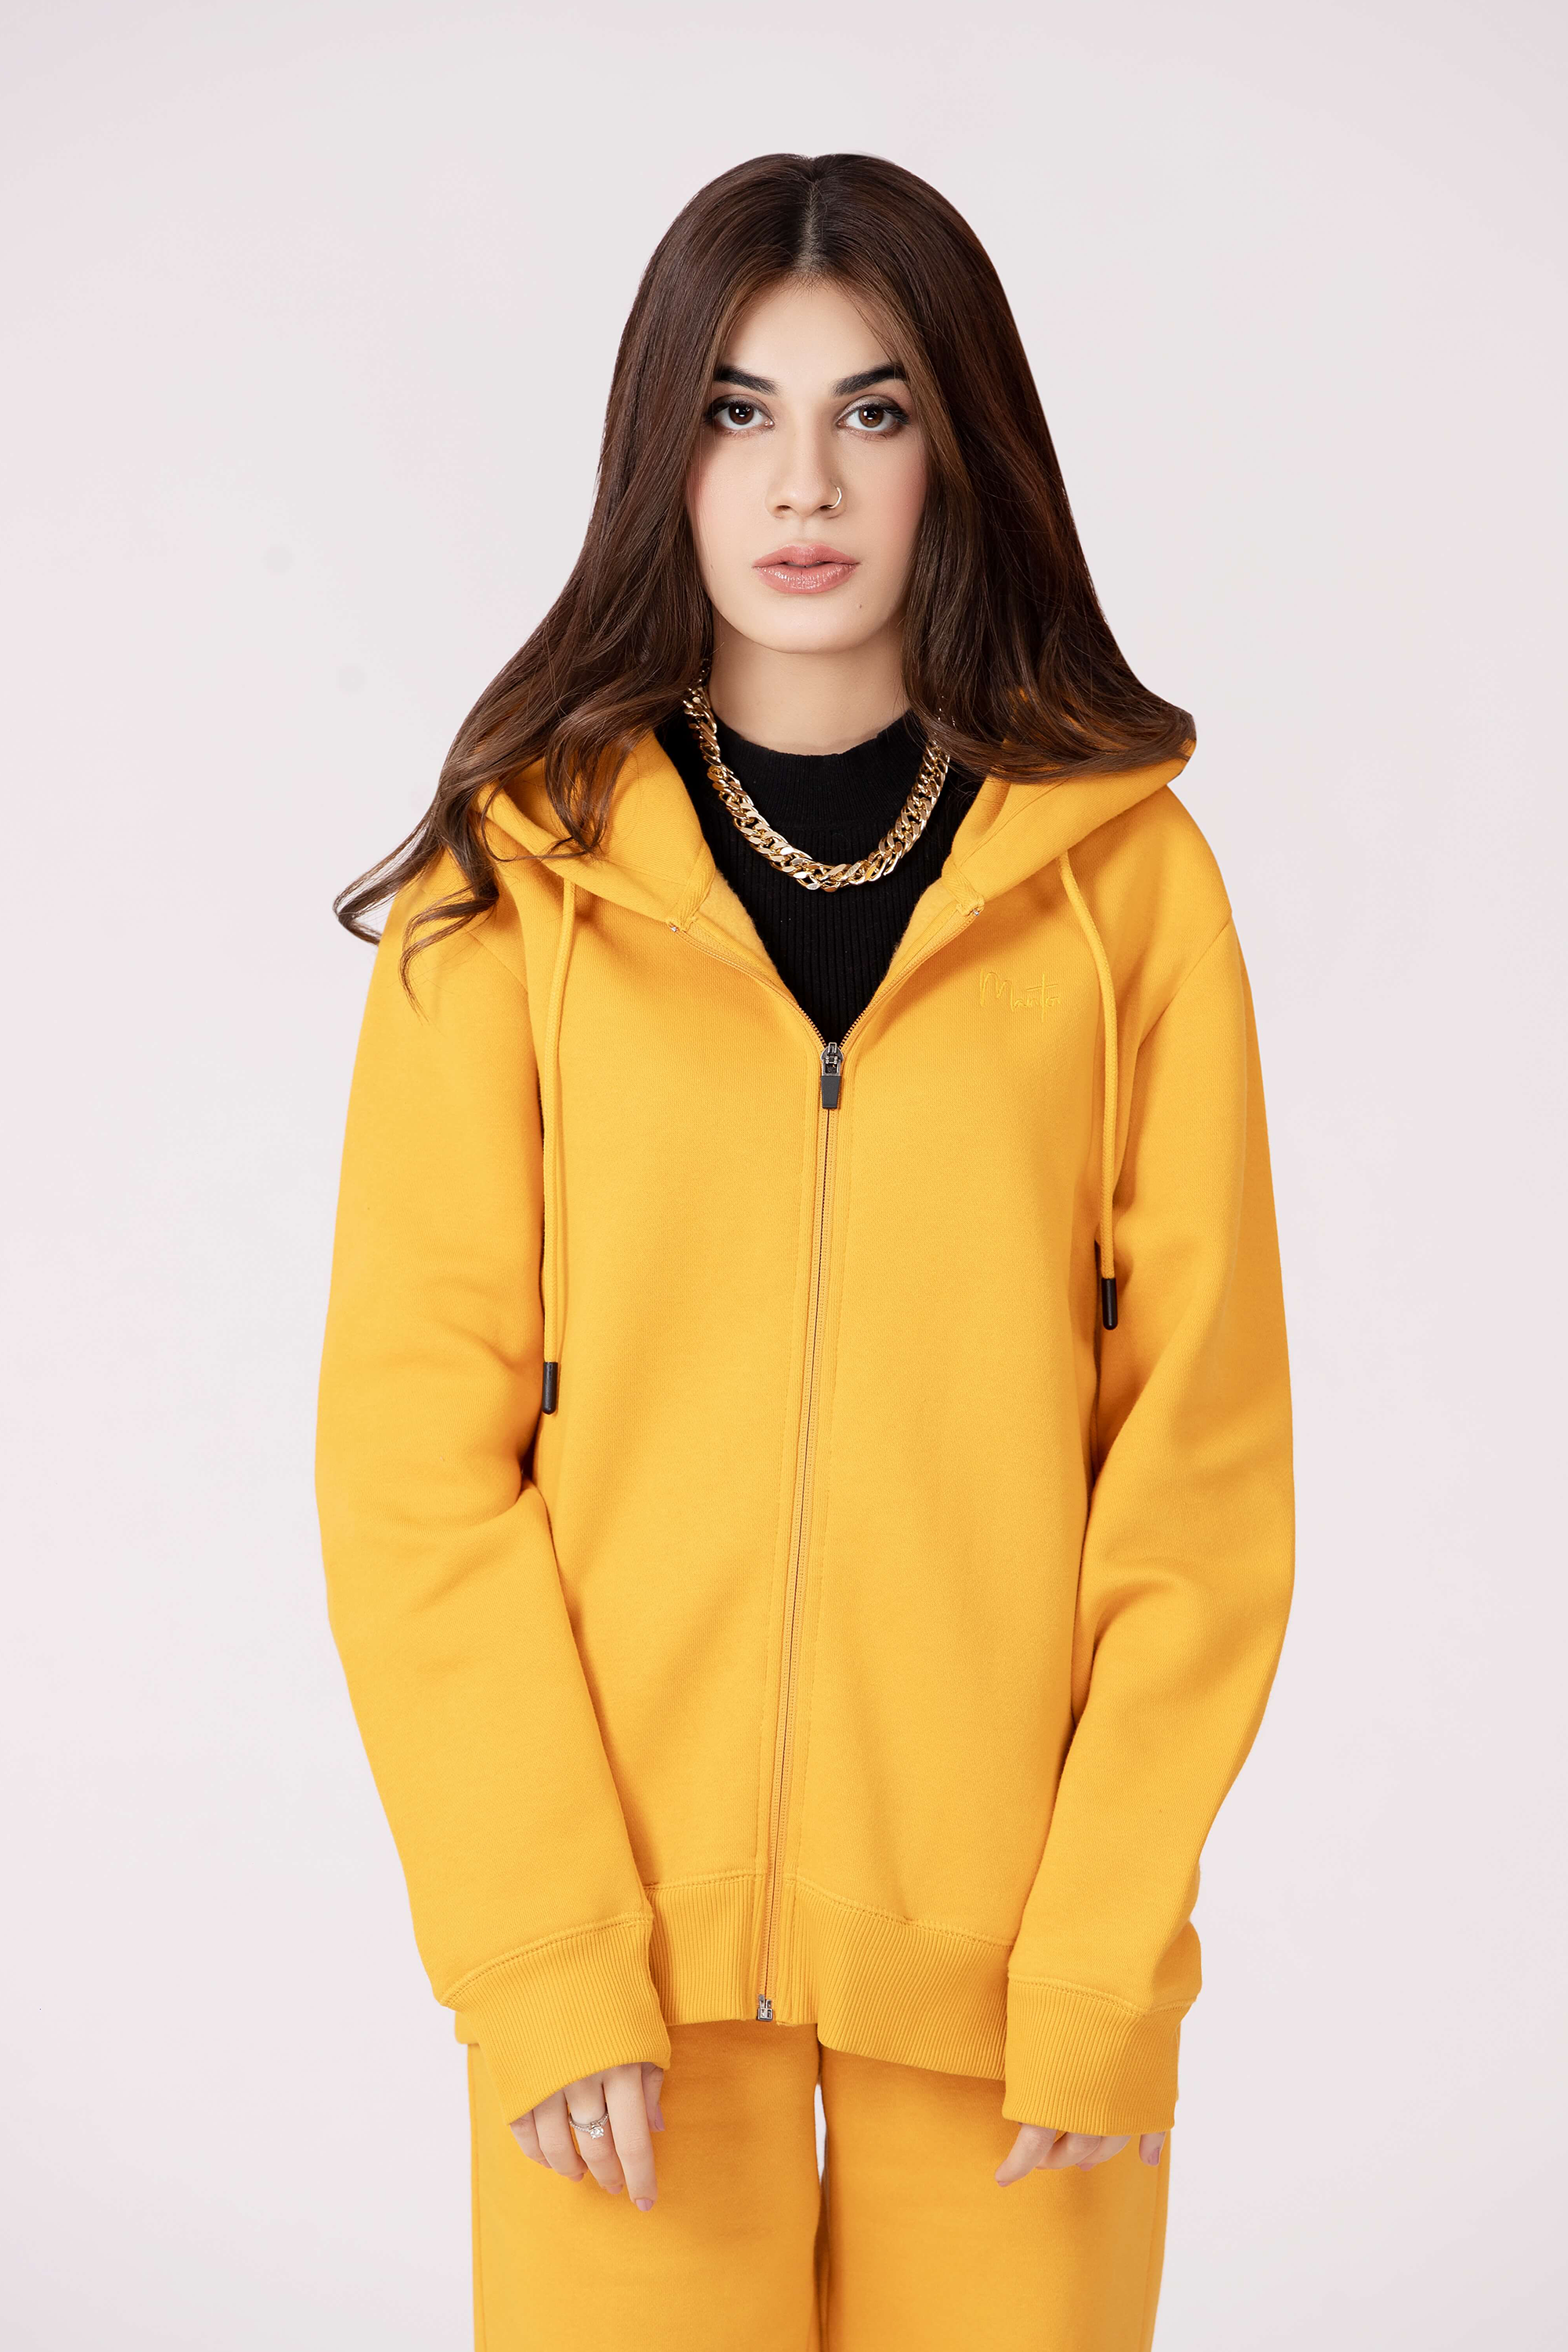 Supreme Hoodie for Men and Women in Pakistan